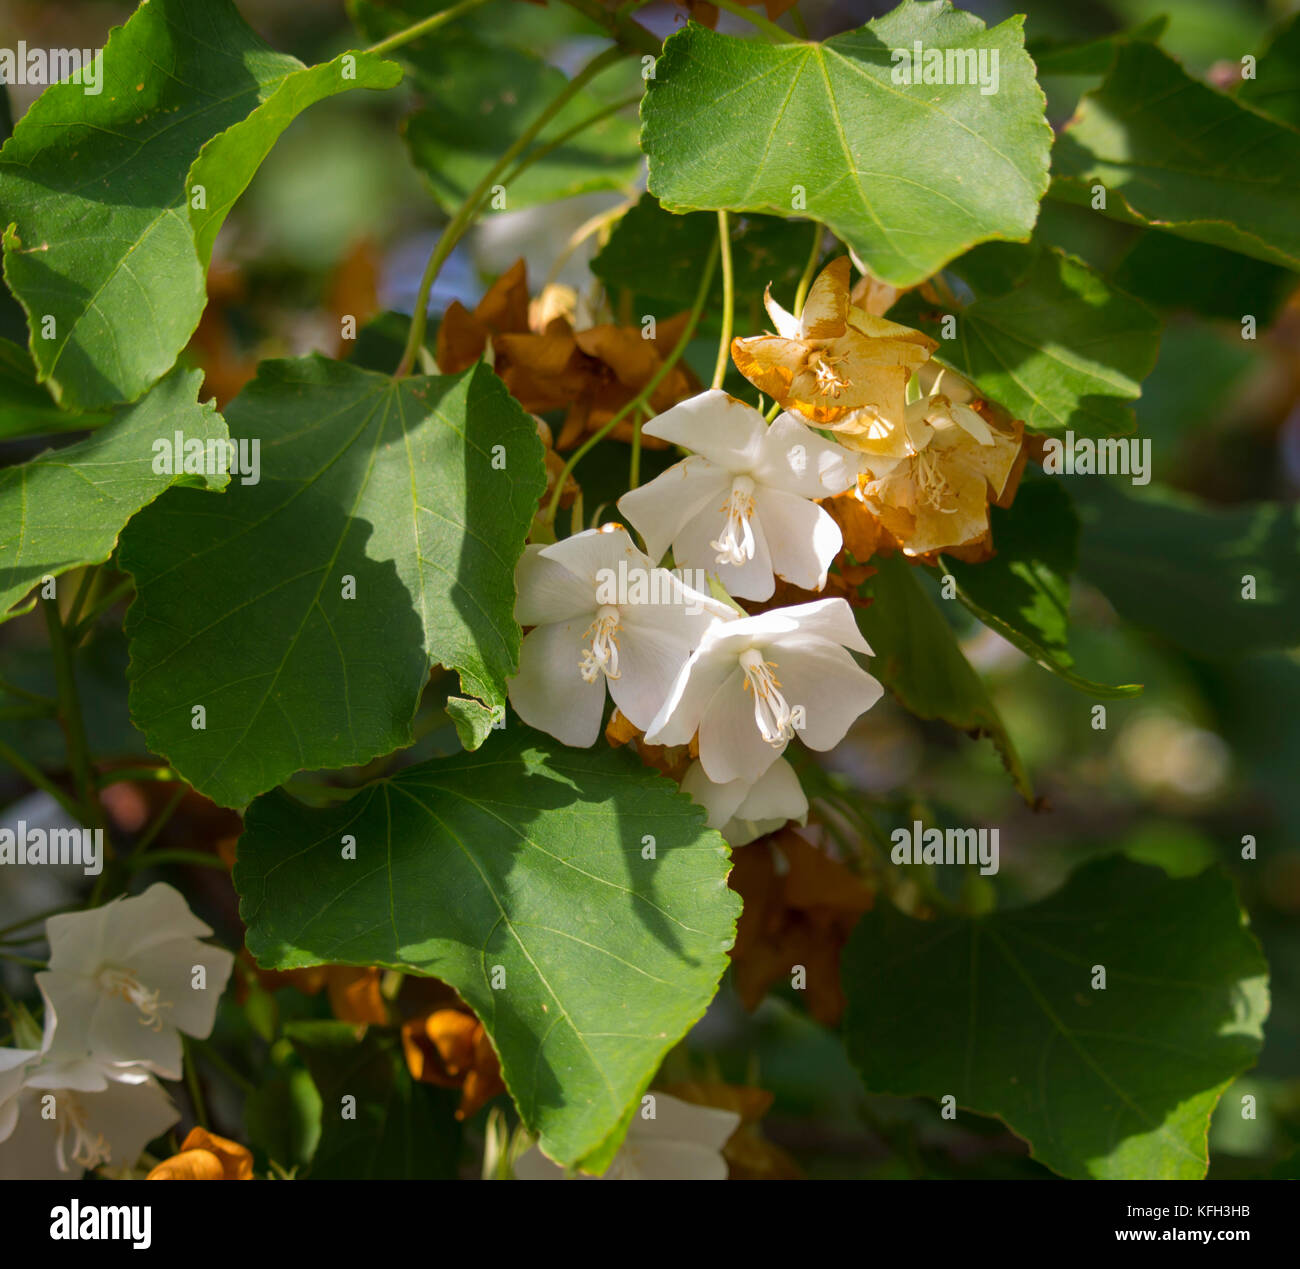 Delicate hanging dainty fragrant white cup shaped ornamental drooping flowers of  Dombeya natalensis  Natal Wedding Flower blooming in late autumn. Stock Photo